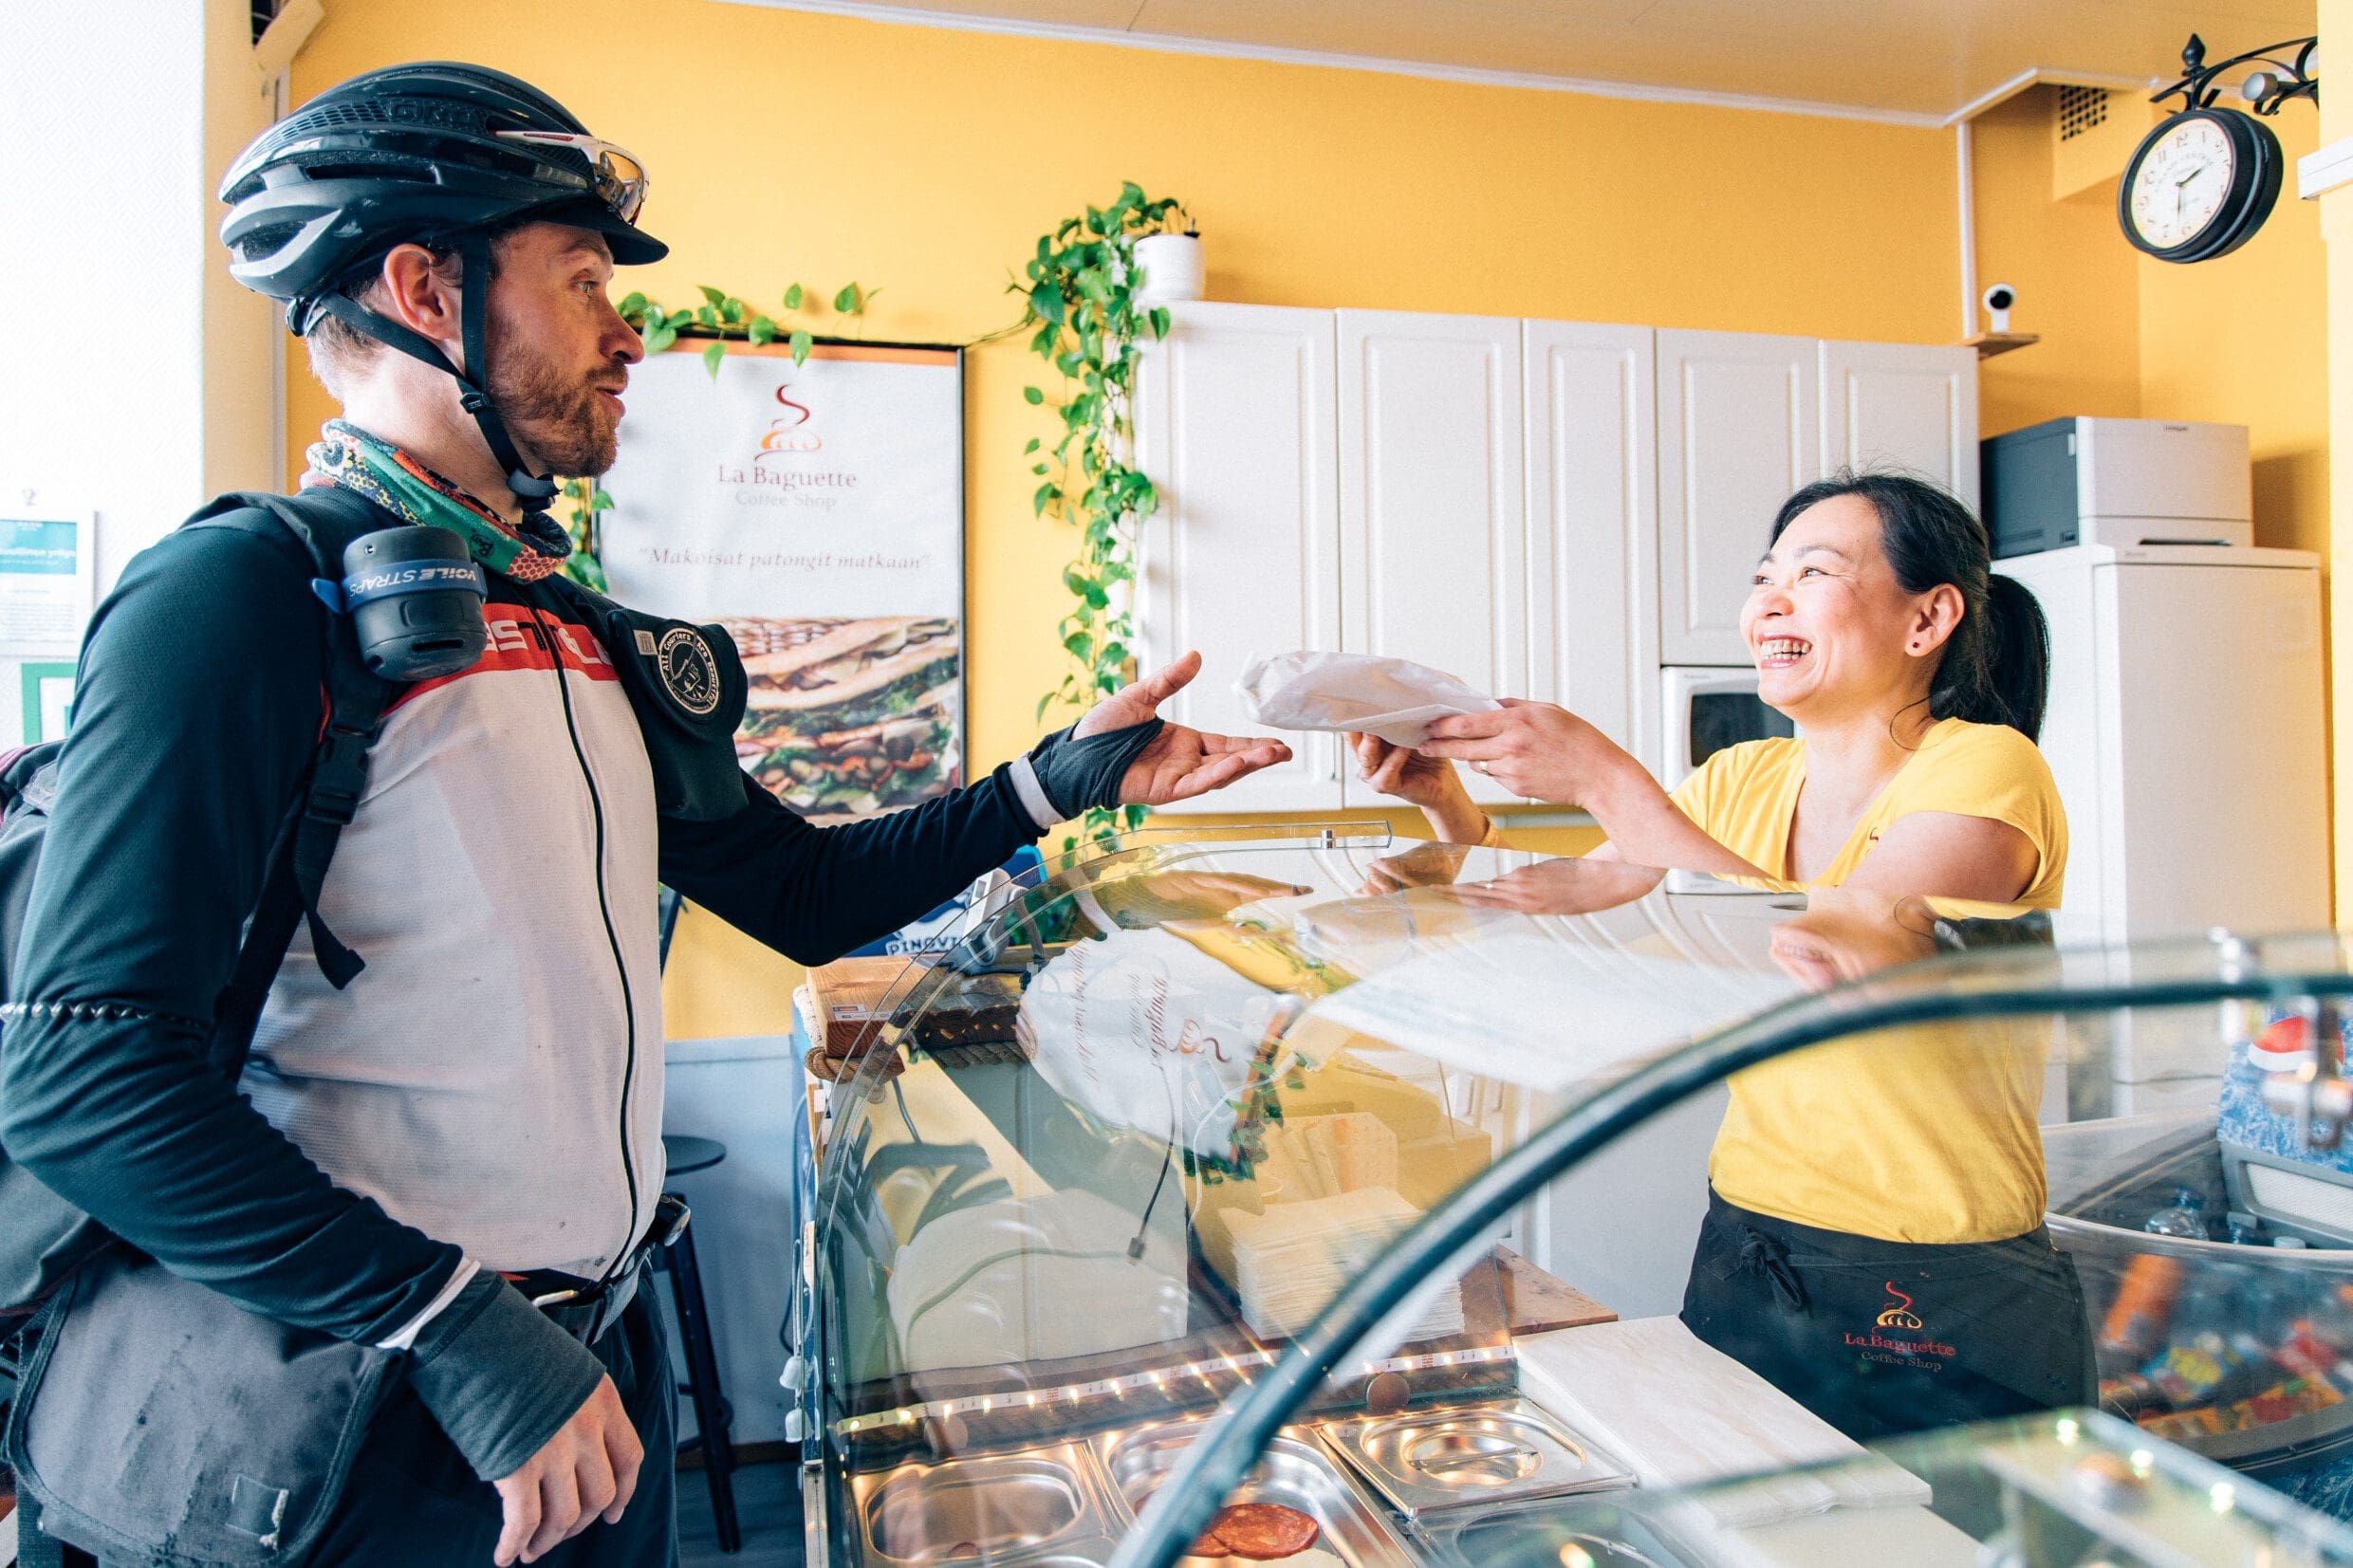 Inside a cafe with bright yellow walls, on the right a café owner passes a food order over a glass counter to a courier dressed in full cyclists' gear. The woman is smiling broadly.